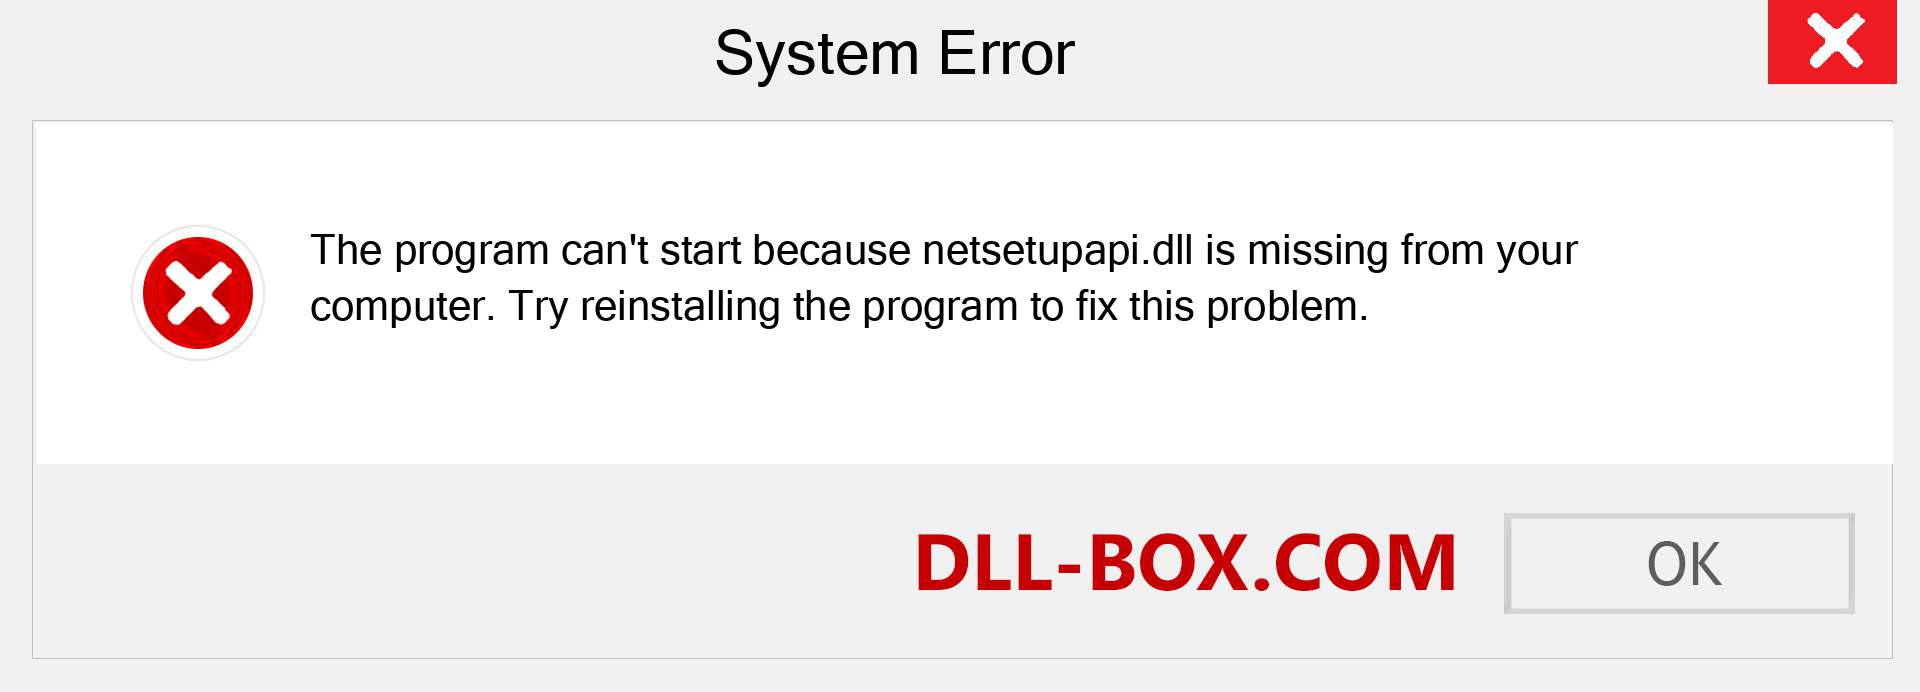  netsetupapi.dll file is missing?. Download for Windows 7, 8, 10 - Fix  netsetupapi dll Missing Error on Windows, photos, images